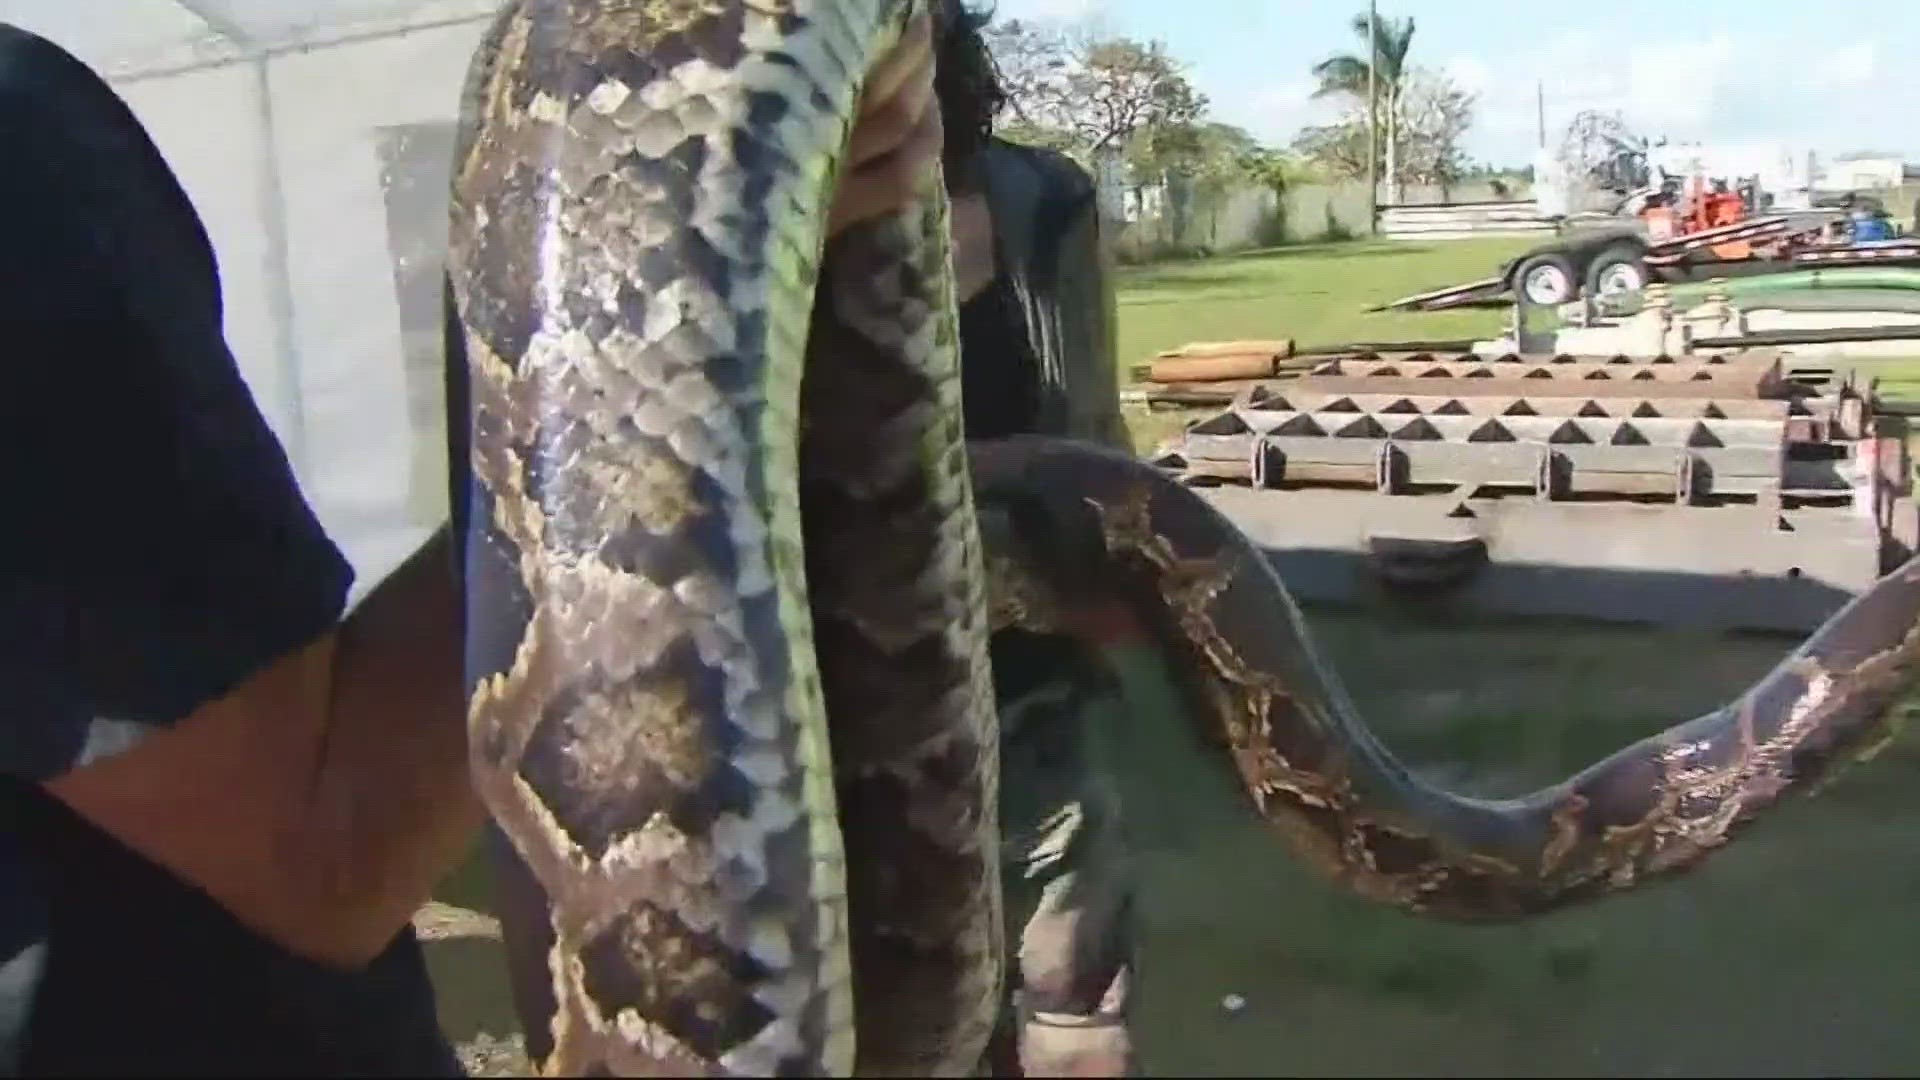 A University of Florida team put radio trackers on eight pythons before releasing them back into the Everglades.